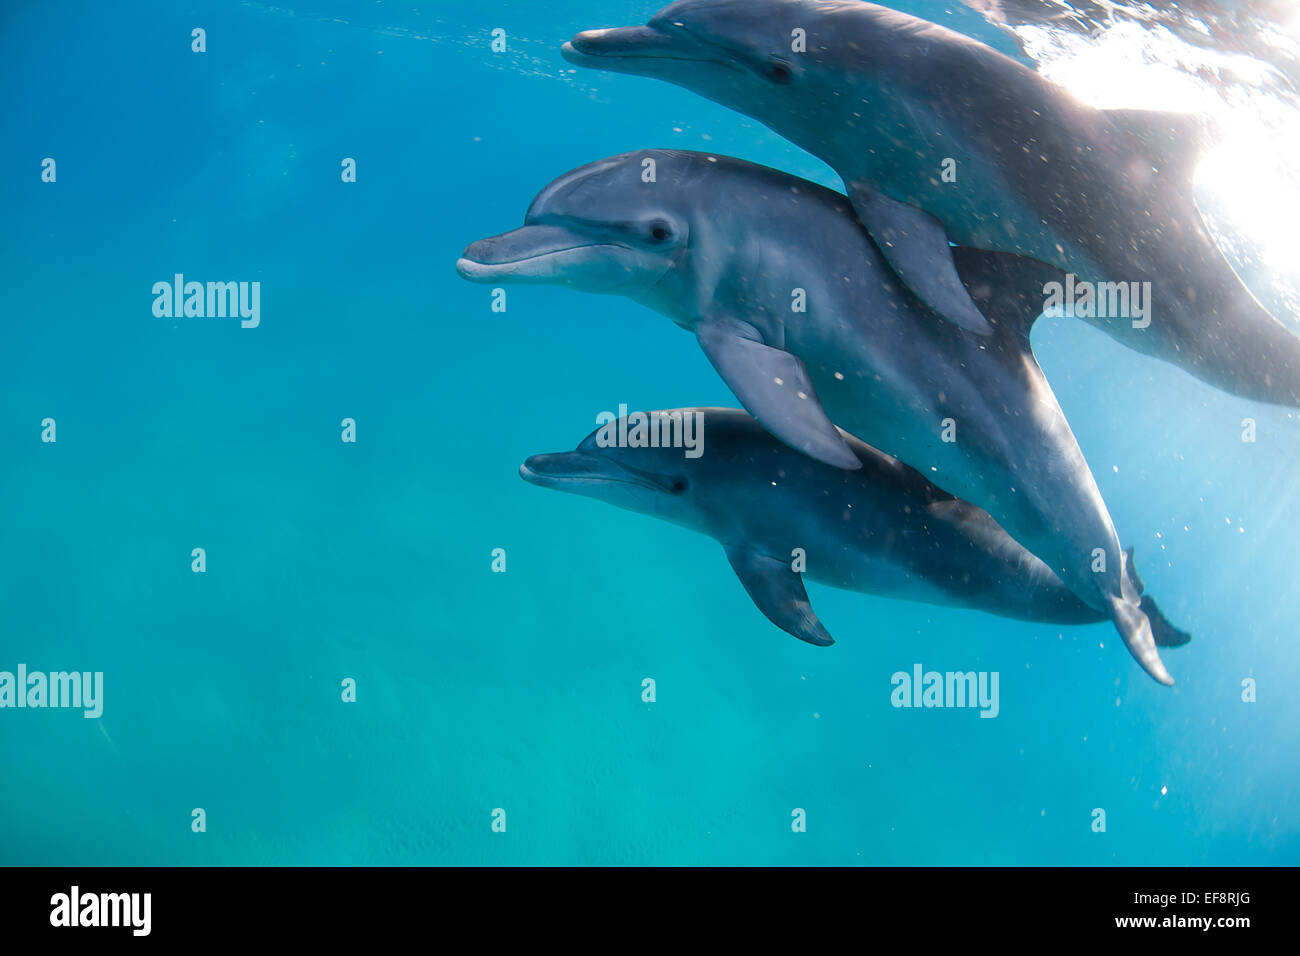 Mozambique, Ponta do Ouro, Three bottlenose dolphins in clear water Stock Photo